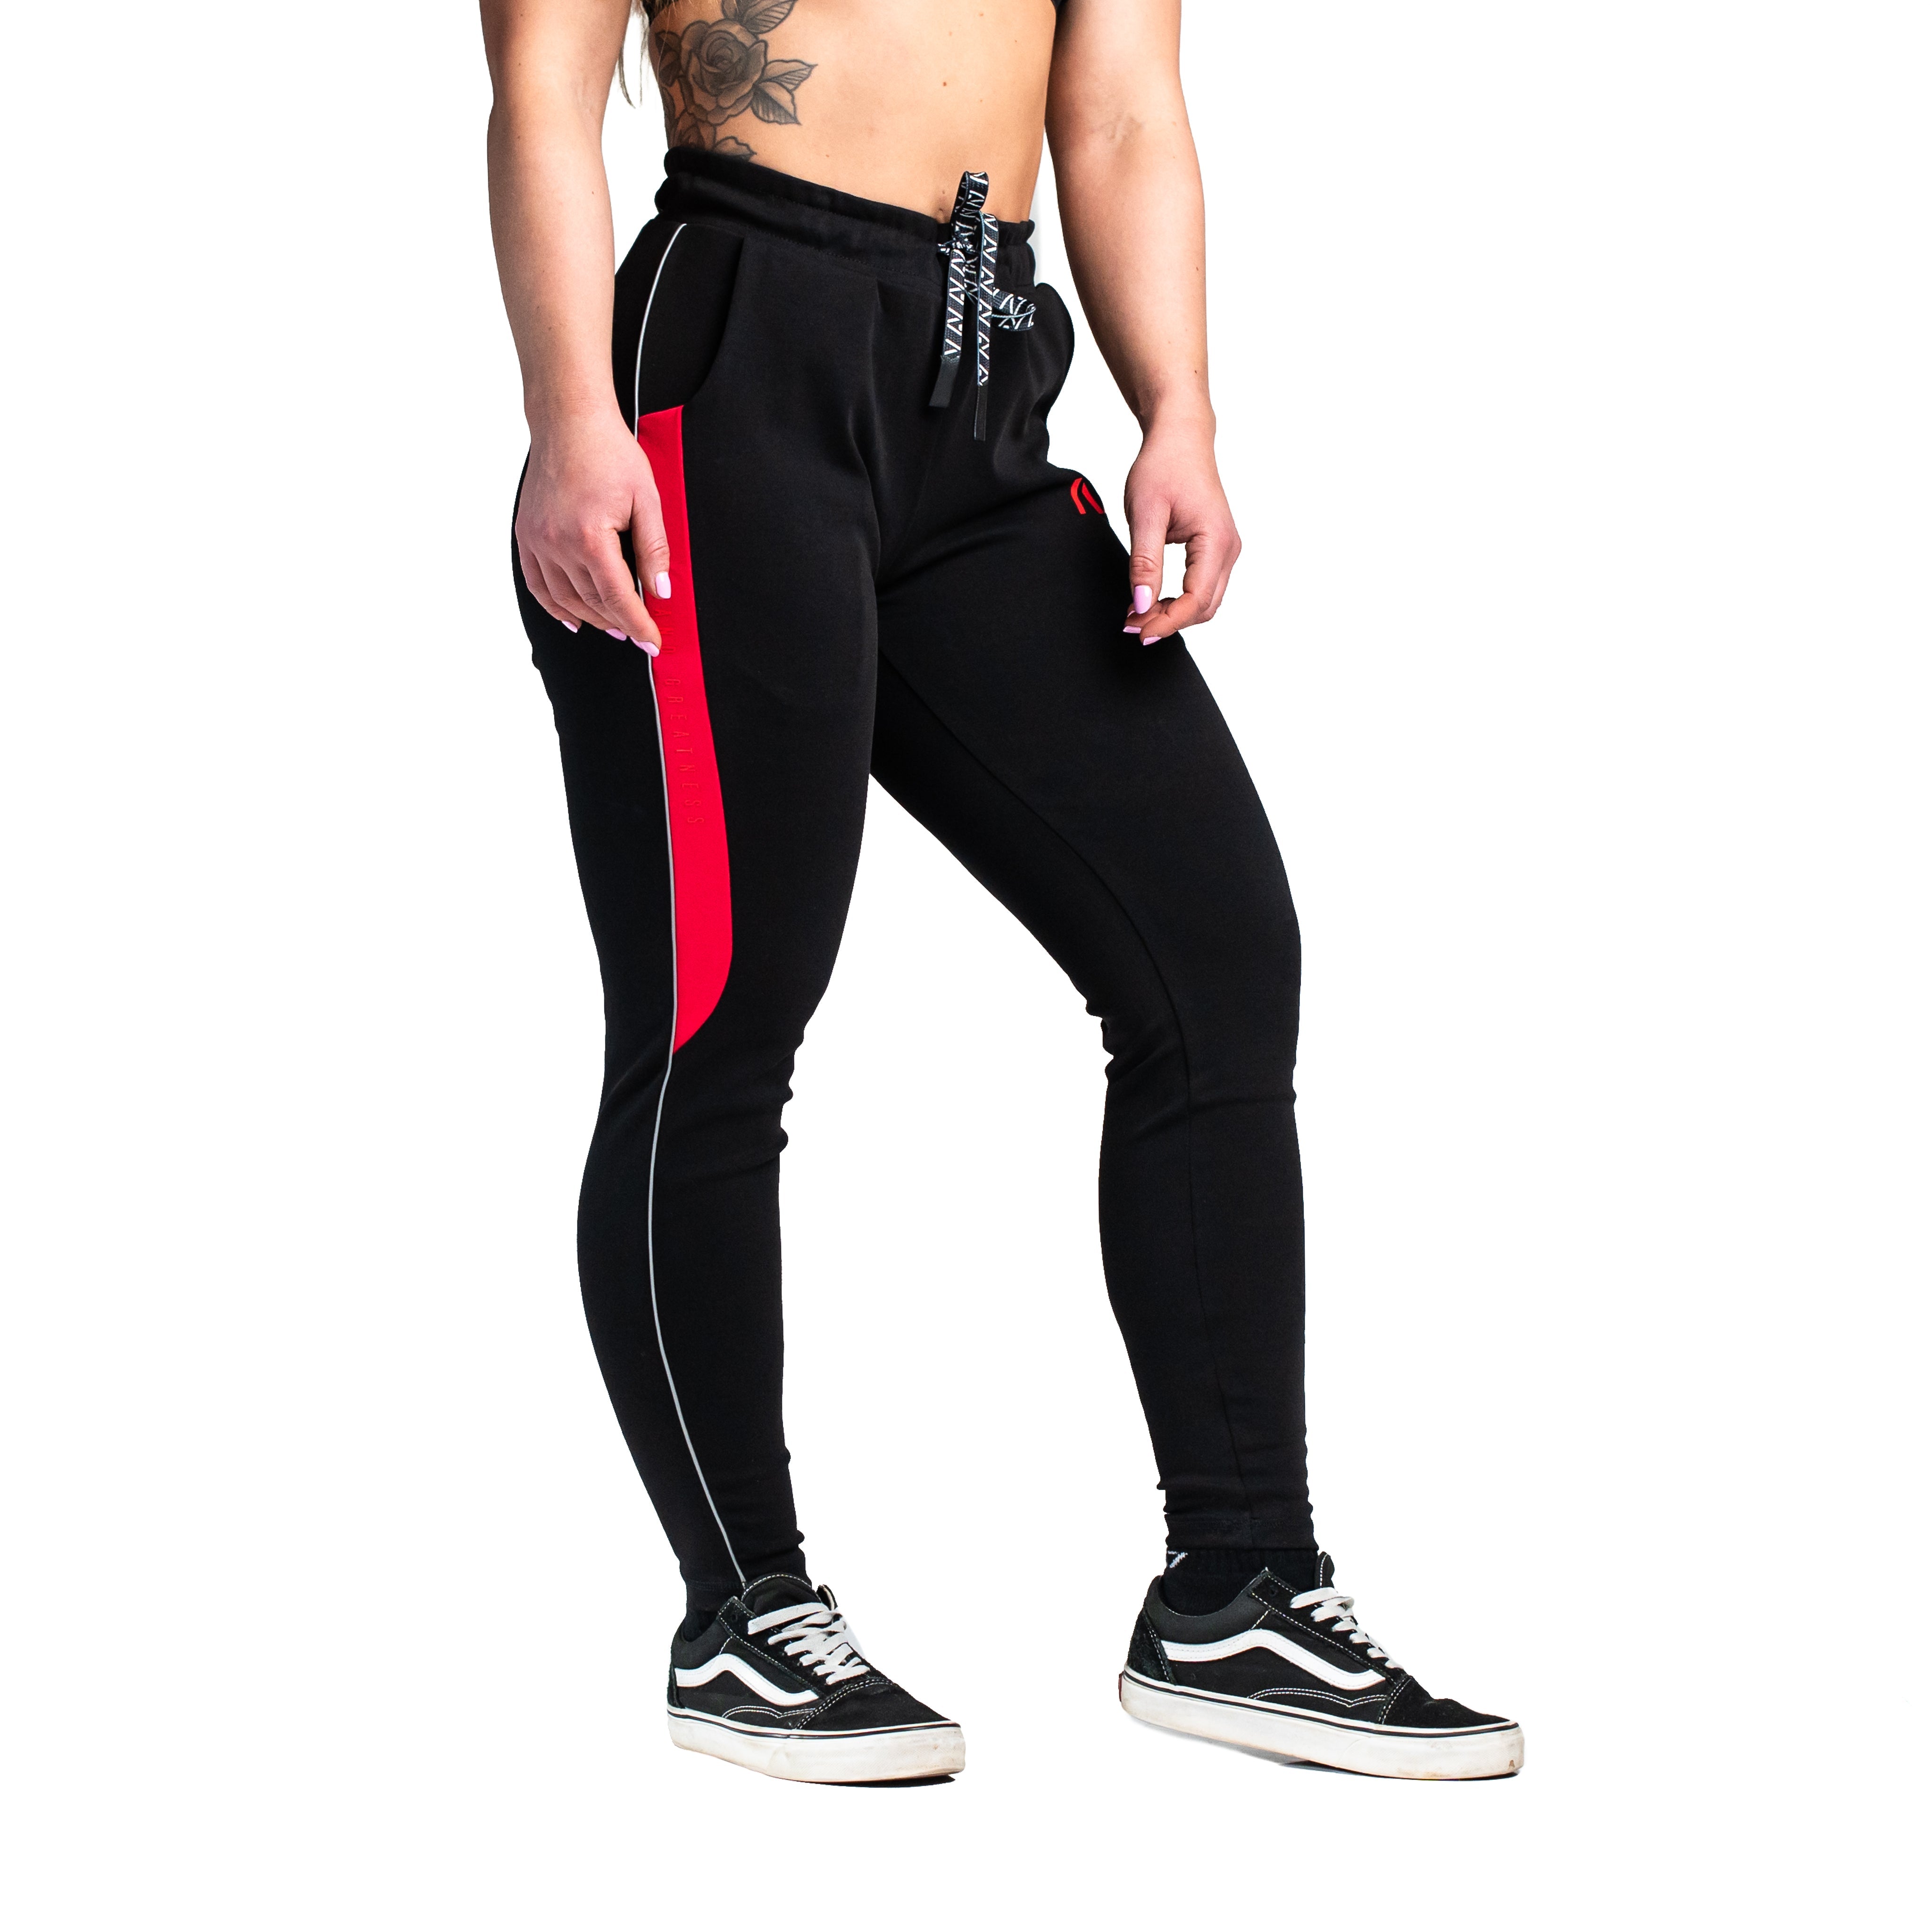 Our Moxie Joggers are made with premium cotton spandex fabric to keep you comfy throughout the day whether you are training or going out! Our Moxie Joggers contour to your body and feature a reflective stripe on both side, deep un-zippered pockets and stealth matte logos. Now in our new Inferno colourway. You can purchase Military Moxie joggers from A7 UK or A7 Europe. A7 UK shipping to UK, Ireland, France, Italy, Germany, the Netherlands, Sweden and Poland.